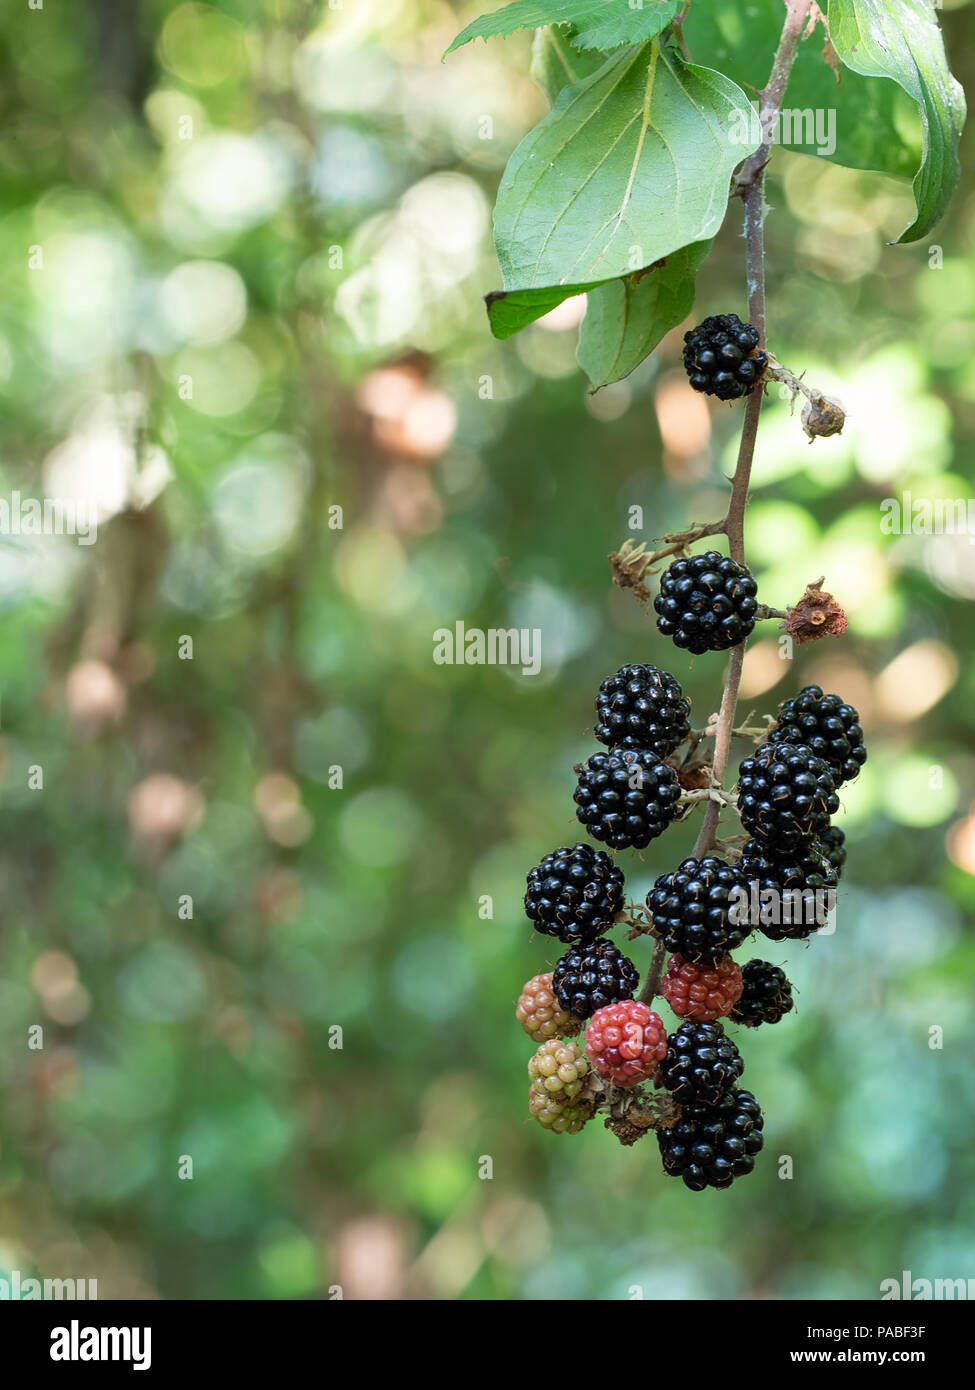 Wild, uncultivated blackberries on plant. Ripe and unripe berries, blurry background from differential focus. Stock Photo